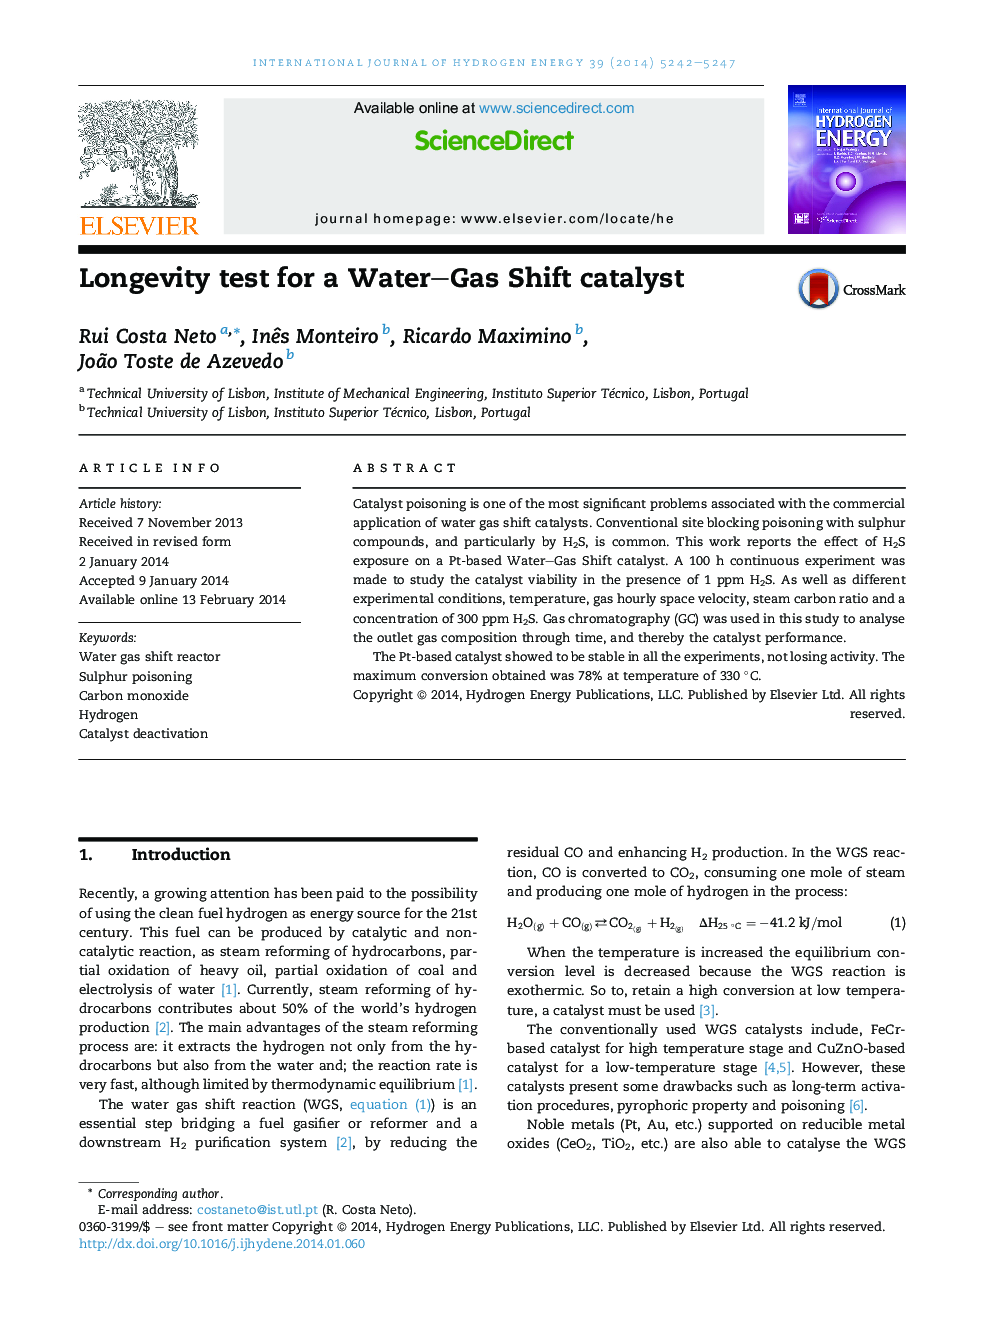 Longevity test for a Water–Gas Shift catalyst